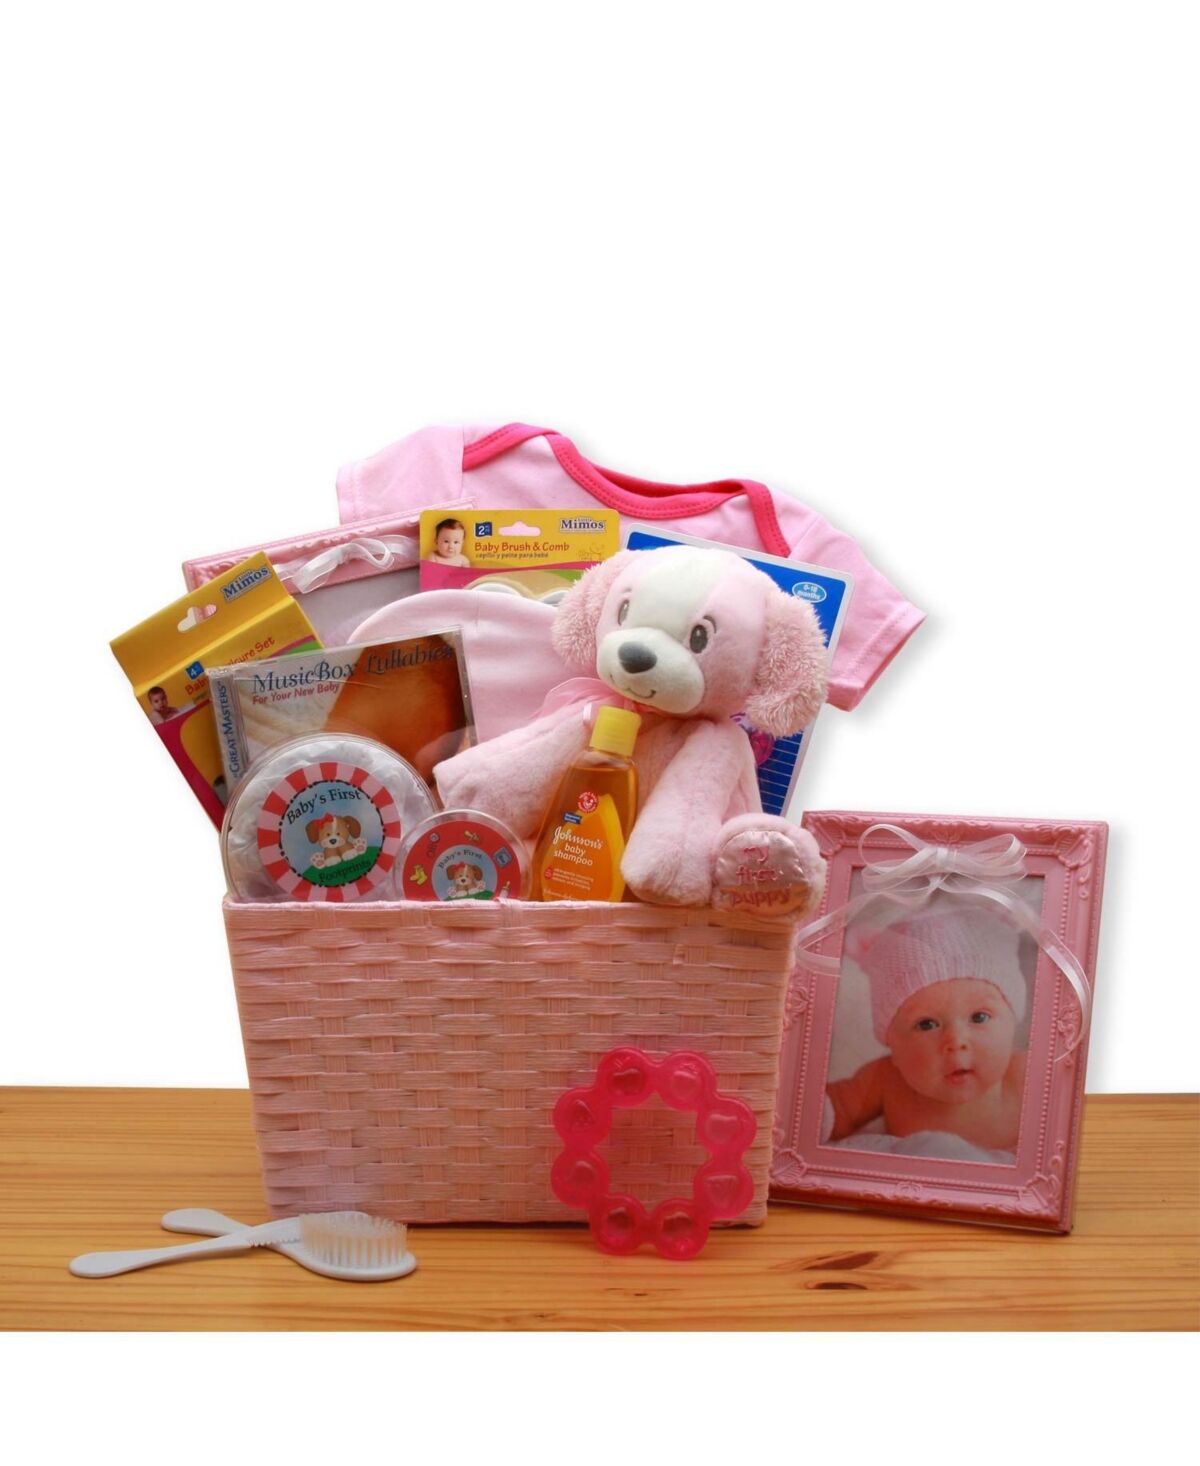 Gbds Puppy Love New Baby Gift Basket - Pink - baby bath set - baby girl gifts - 1 Basket